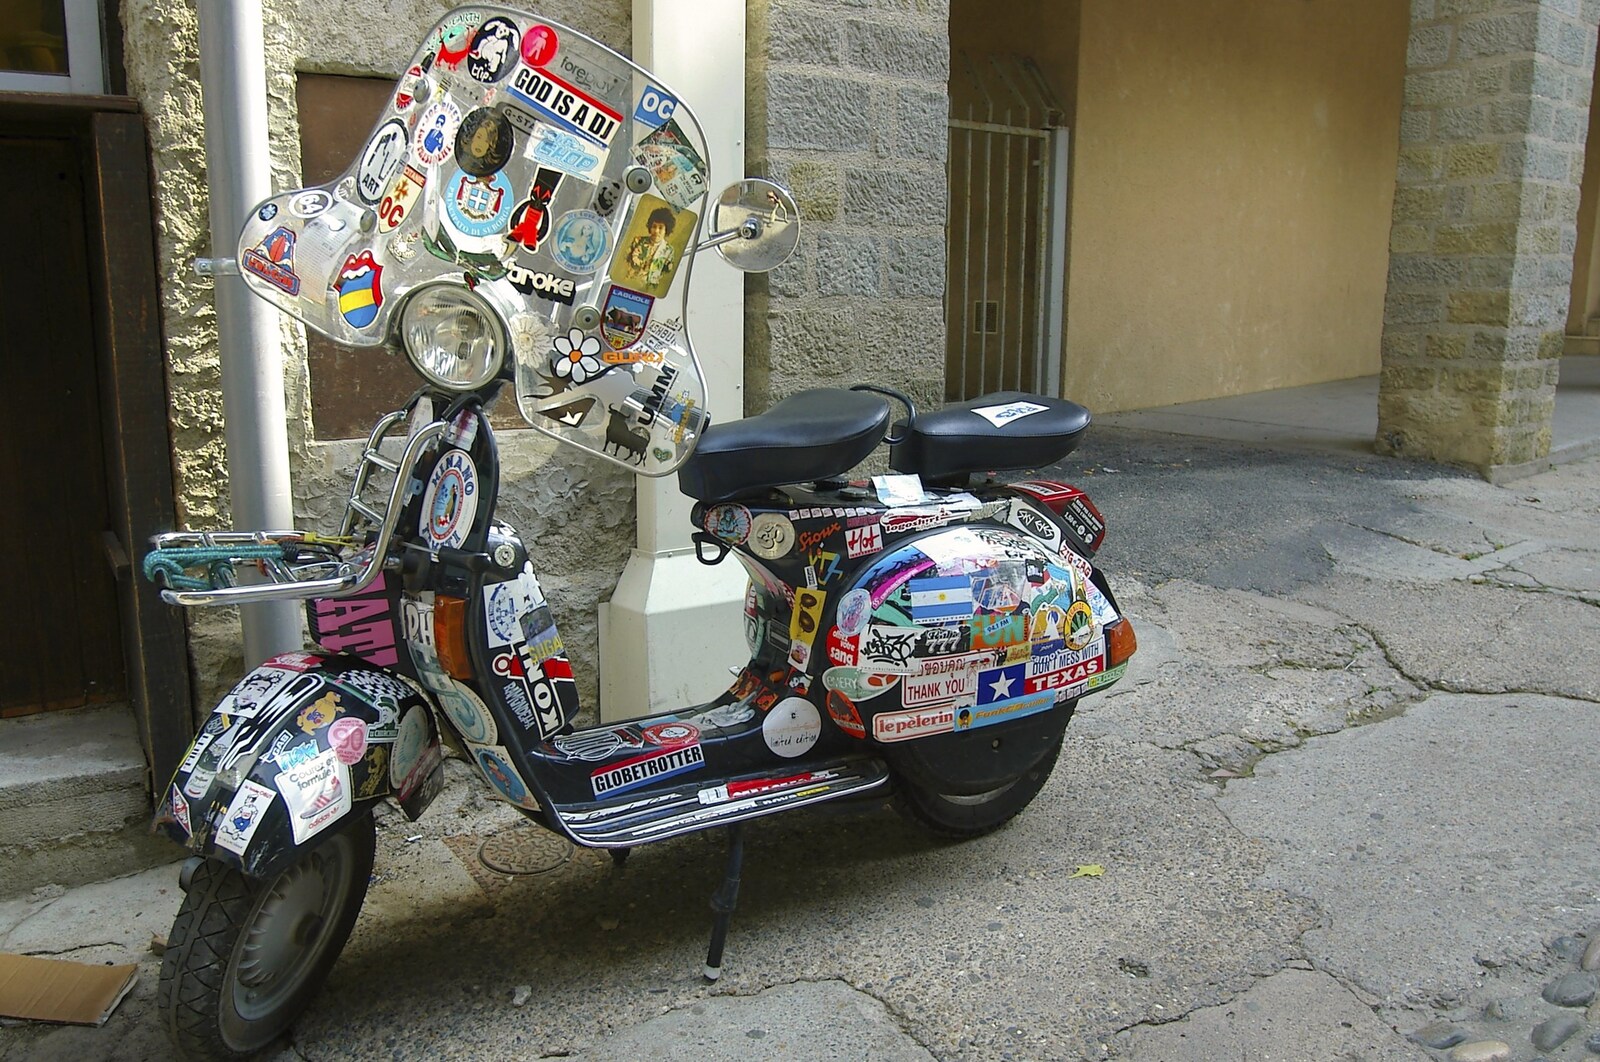 There's a Vespa moped covered in stickers from A Couple of Days in Carcassonne, Aude, France - 21st September 2006